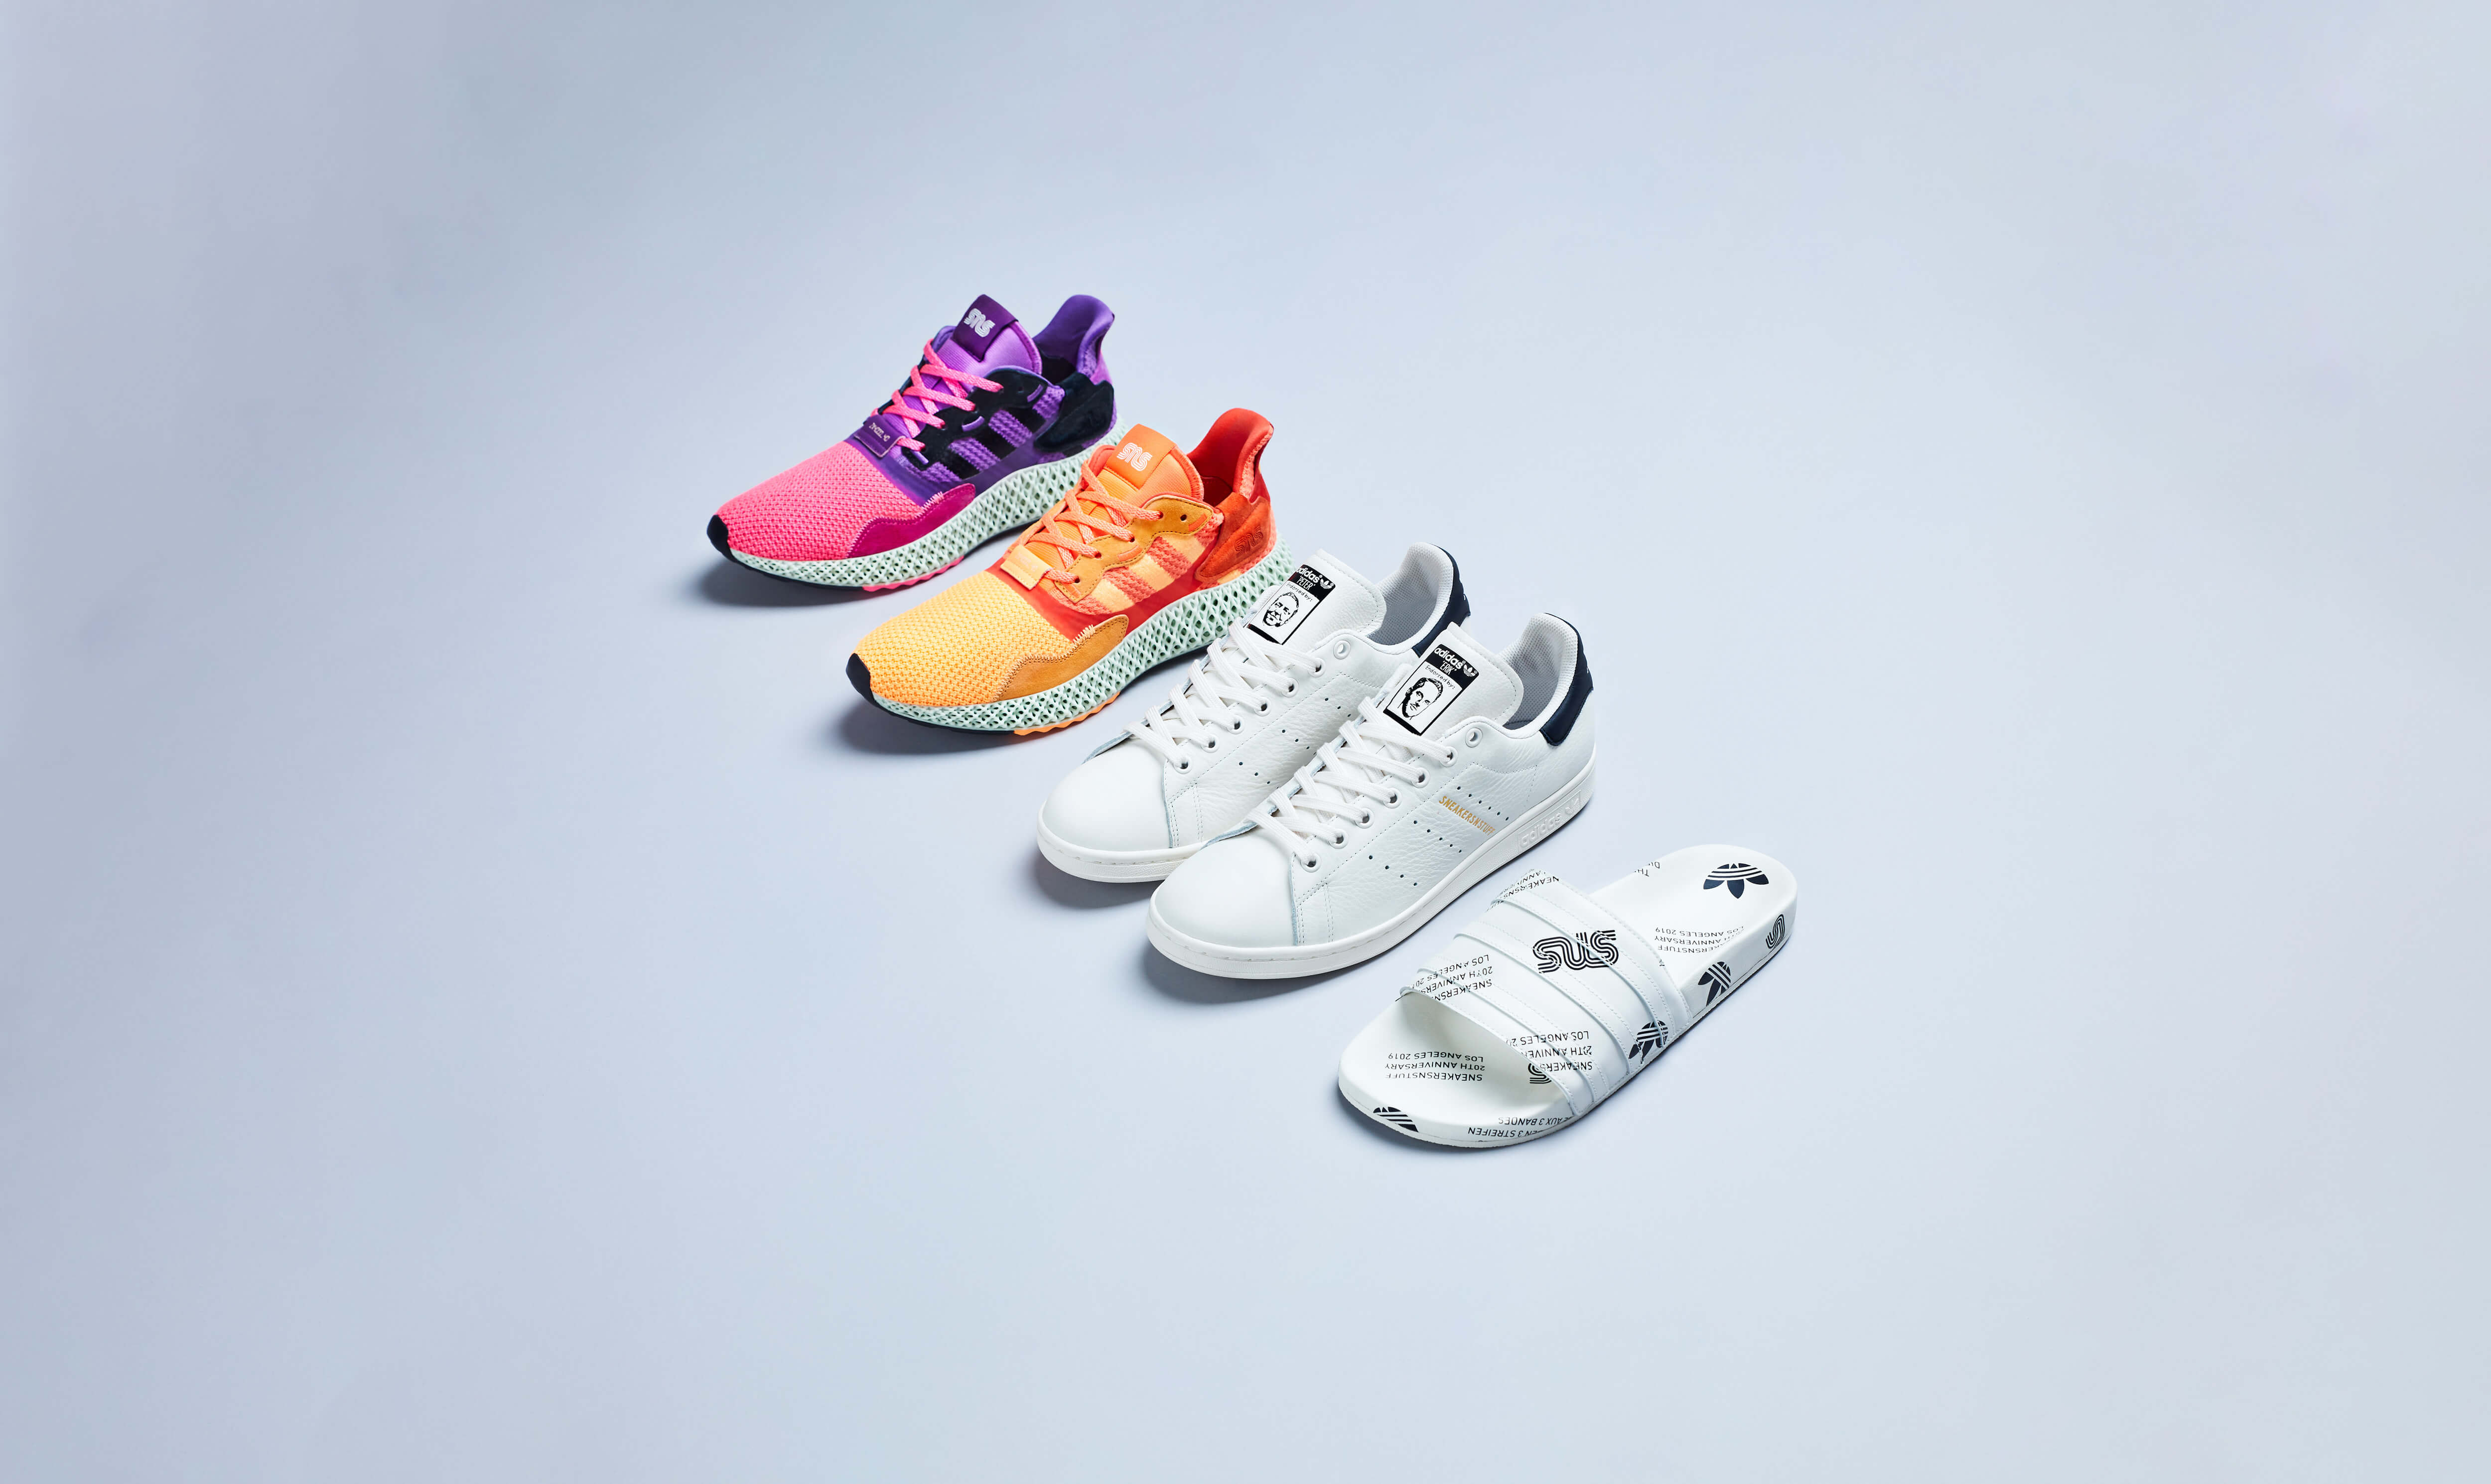 Sneakersnstuff x Adidas Consortium “20th Anniversary” Collection ...